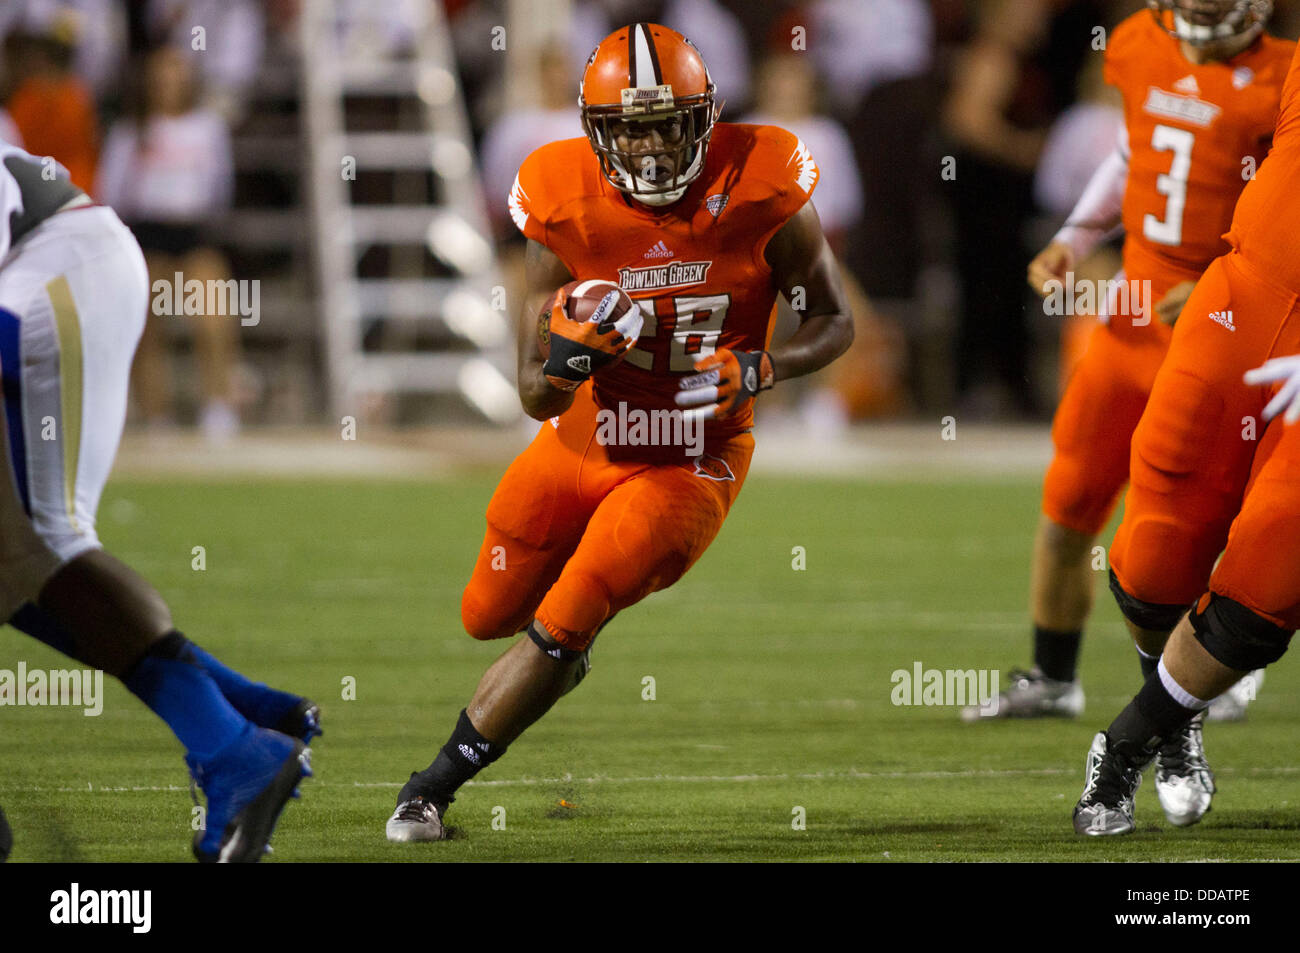 Aug 29, 2013 - Bowling Green, Ohio, U.S. - Bowling Green Falcons running back Fred Coppet #28 runs through a hole during the NCAA football game between the Tulsa Golden Hurricane and the Bowling Green Falcons at Doyt Perry Stadium. Bowling Green won 34-7. Stock Photo